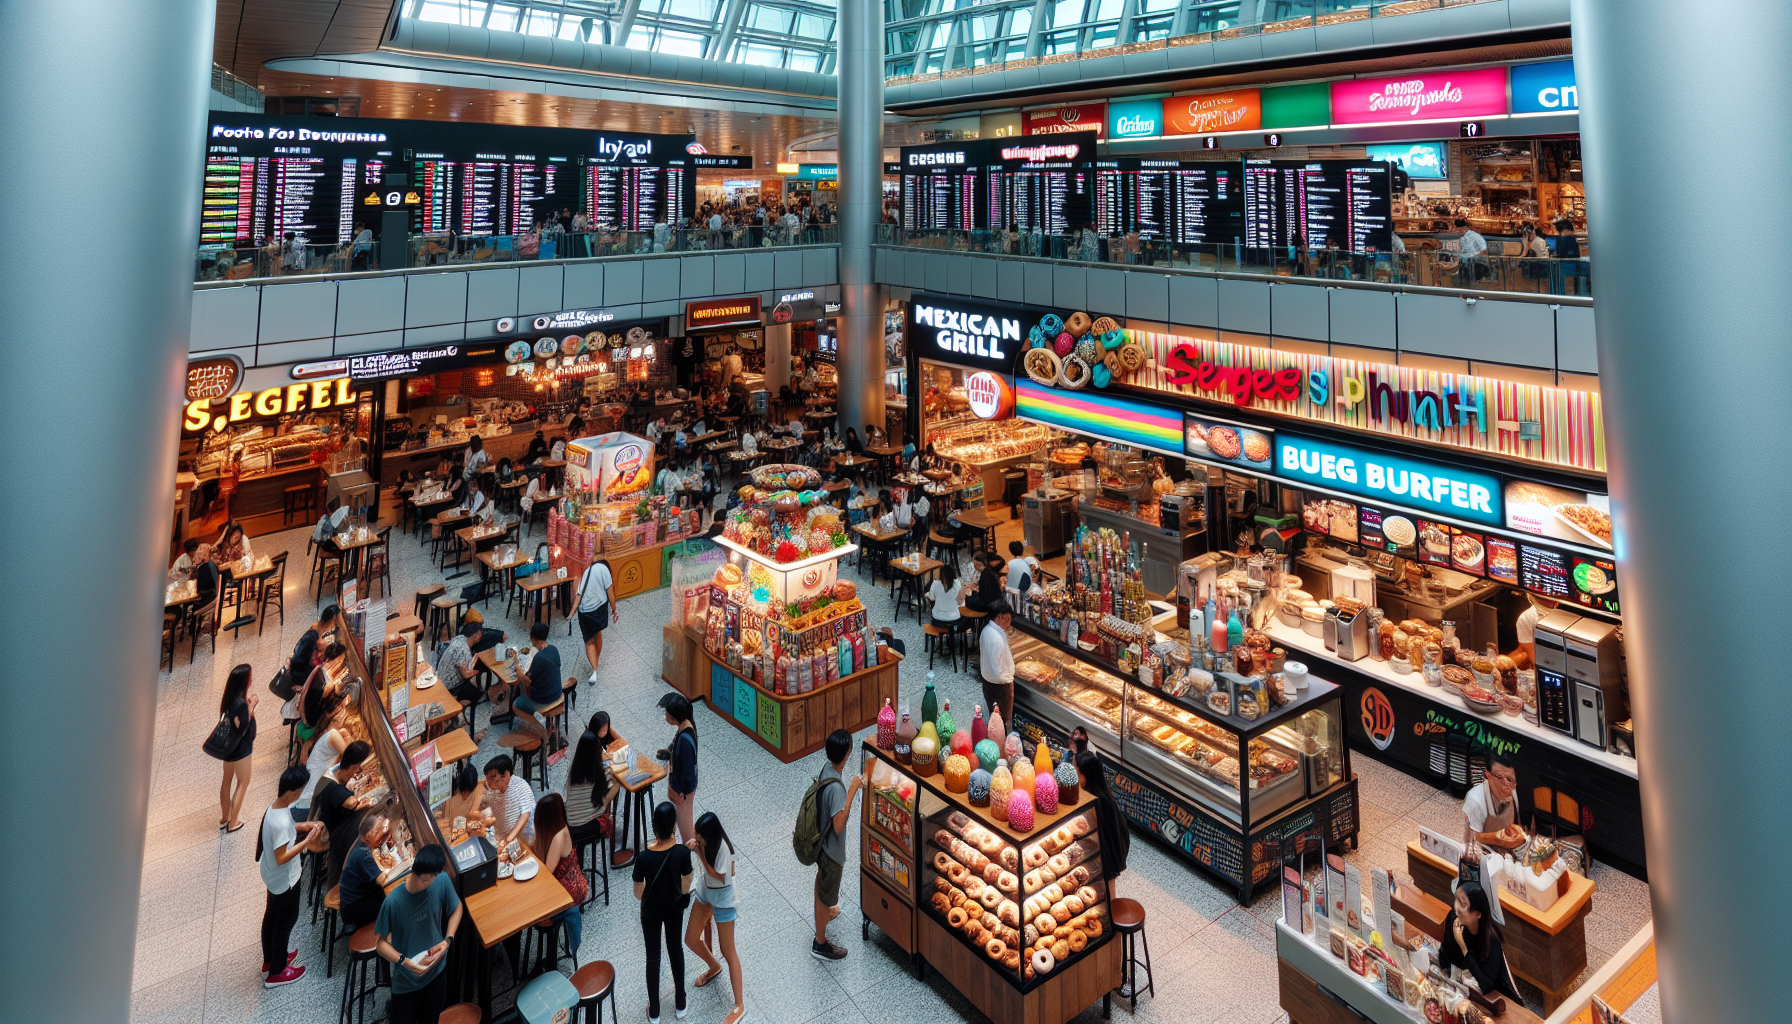 Choices like Jamba Juice, Dunkin Donuts, Starbucks, Chipotle Mexican Grill, Burger King, and Pei Wei Asian Diner in Terminal 3